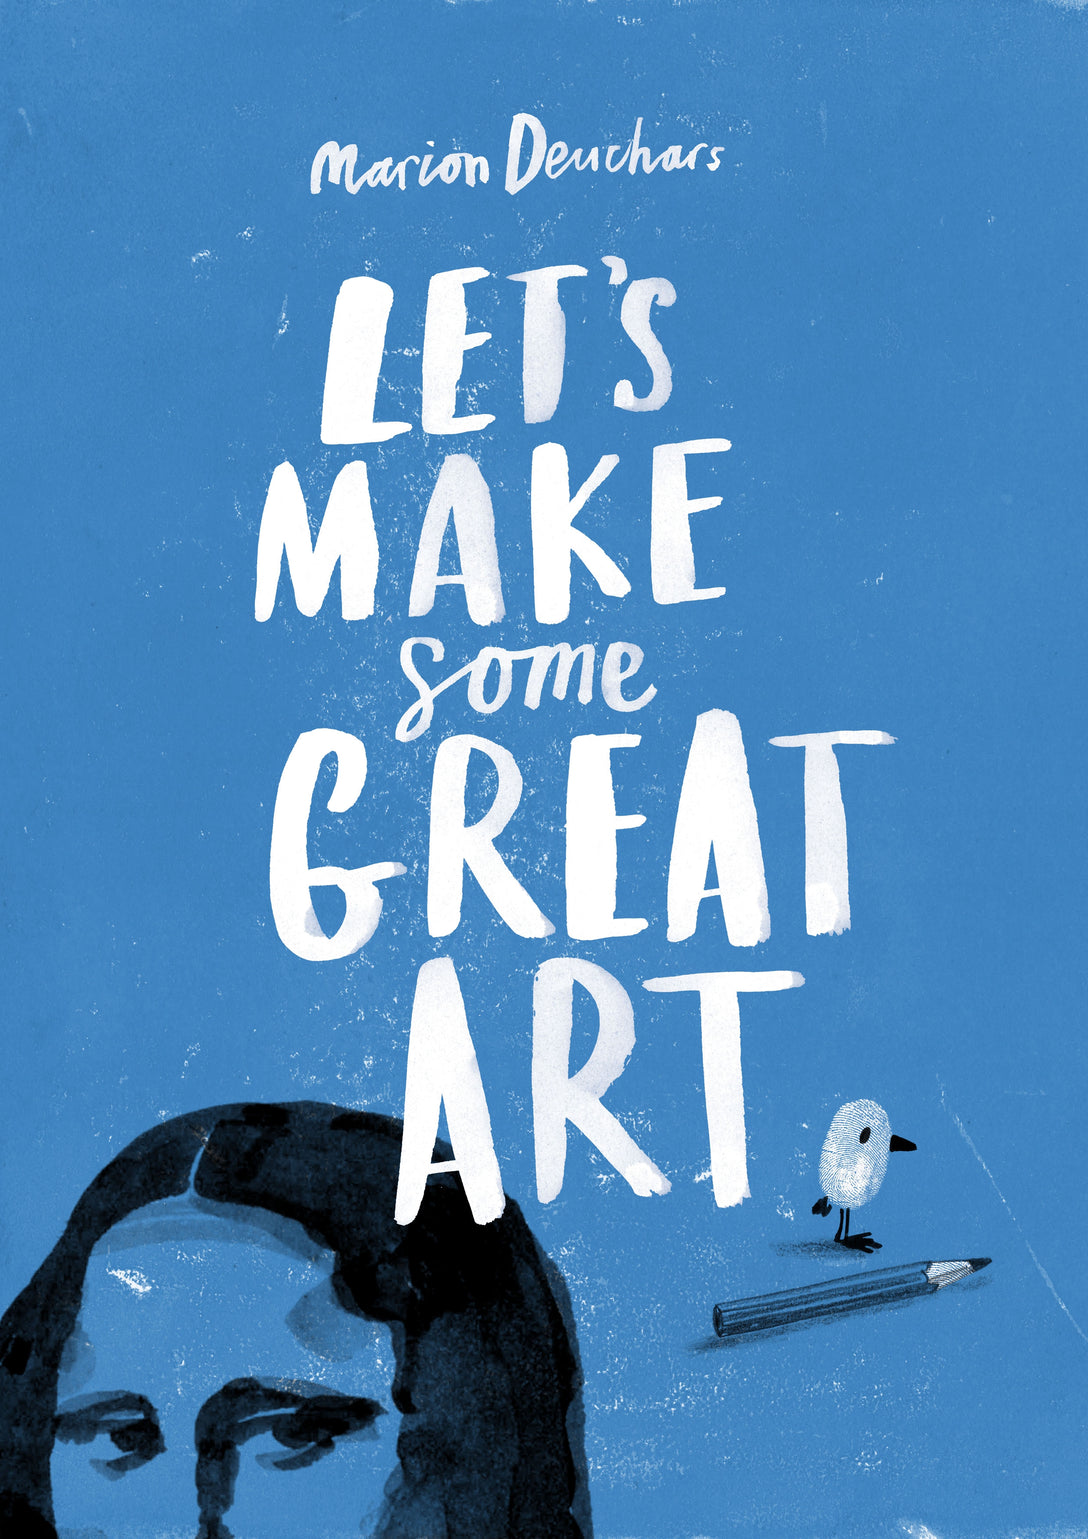 Let's Make Some Great Art by Marion Deuchars